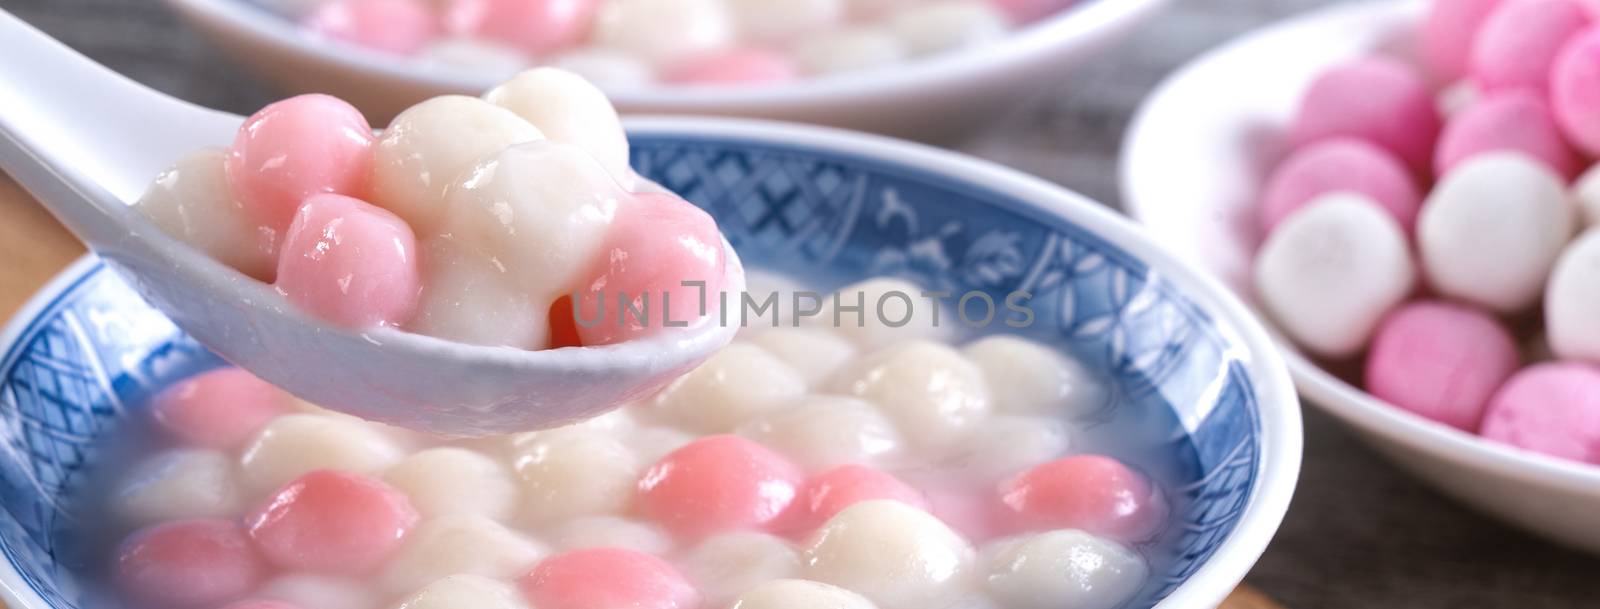 Close up of red and white tangyuan (tang yuan, glutinous rice dumpling balls) in blue bowl on wooden background for Winter solstice festival food.